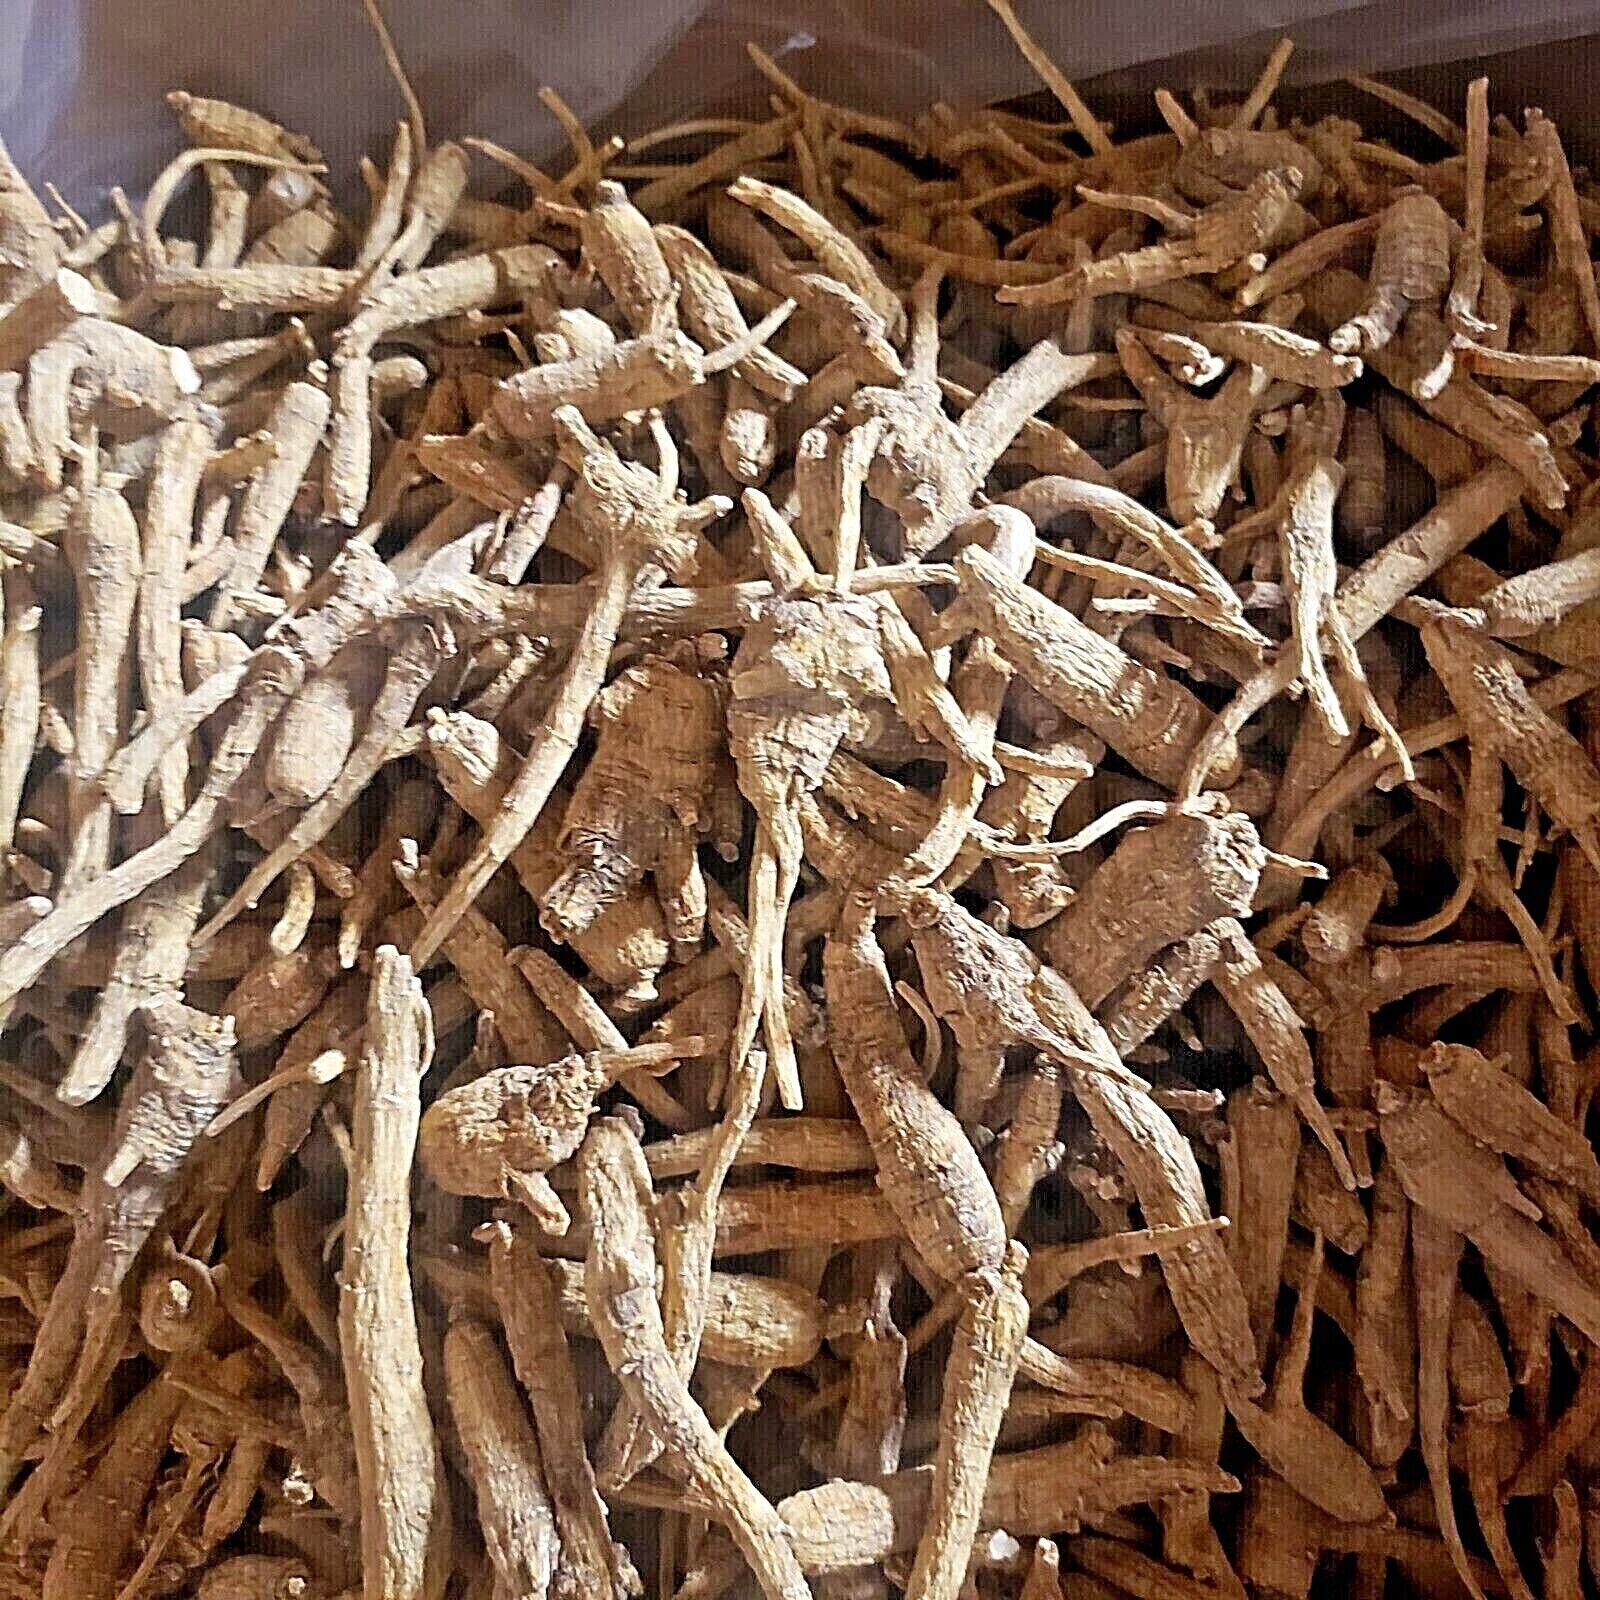 Wholesales 1 LB - 10 LB Wisconsin American Ginseng Root Wisconsin Grown 美国花旗参